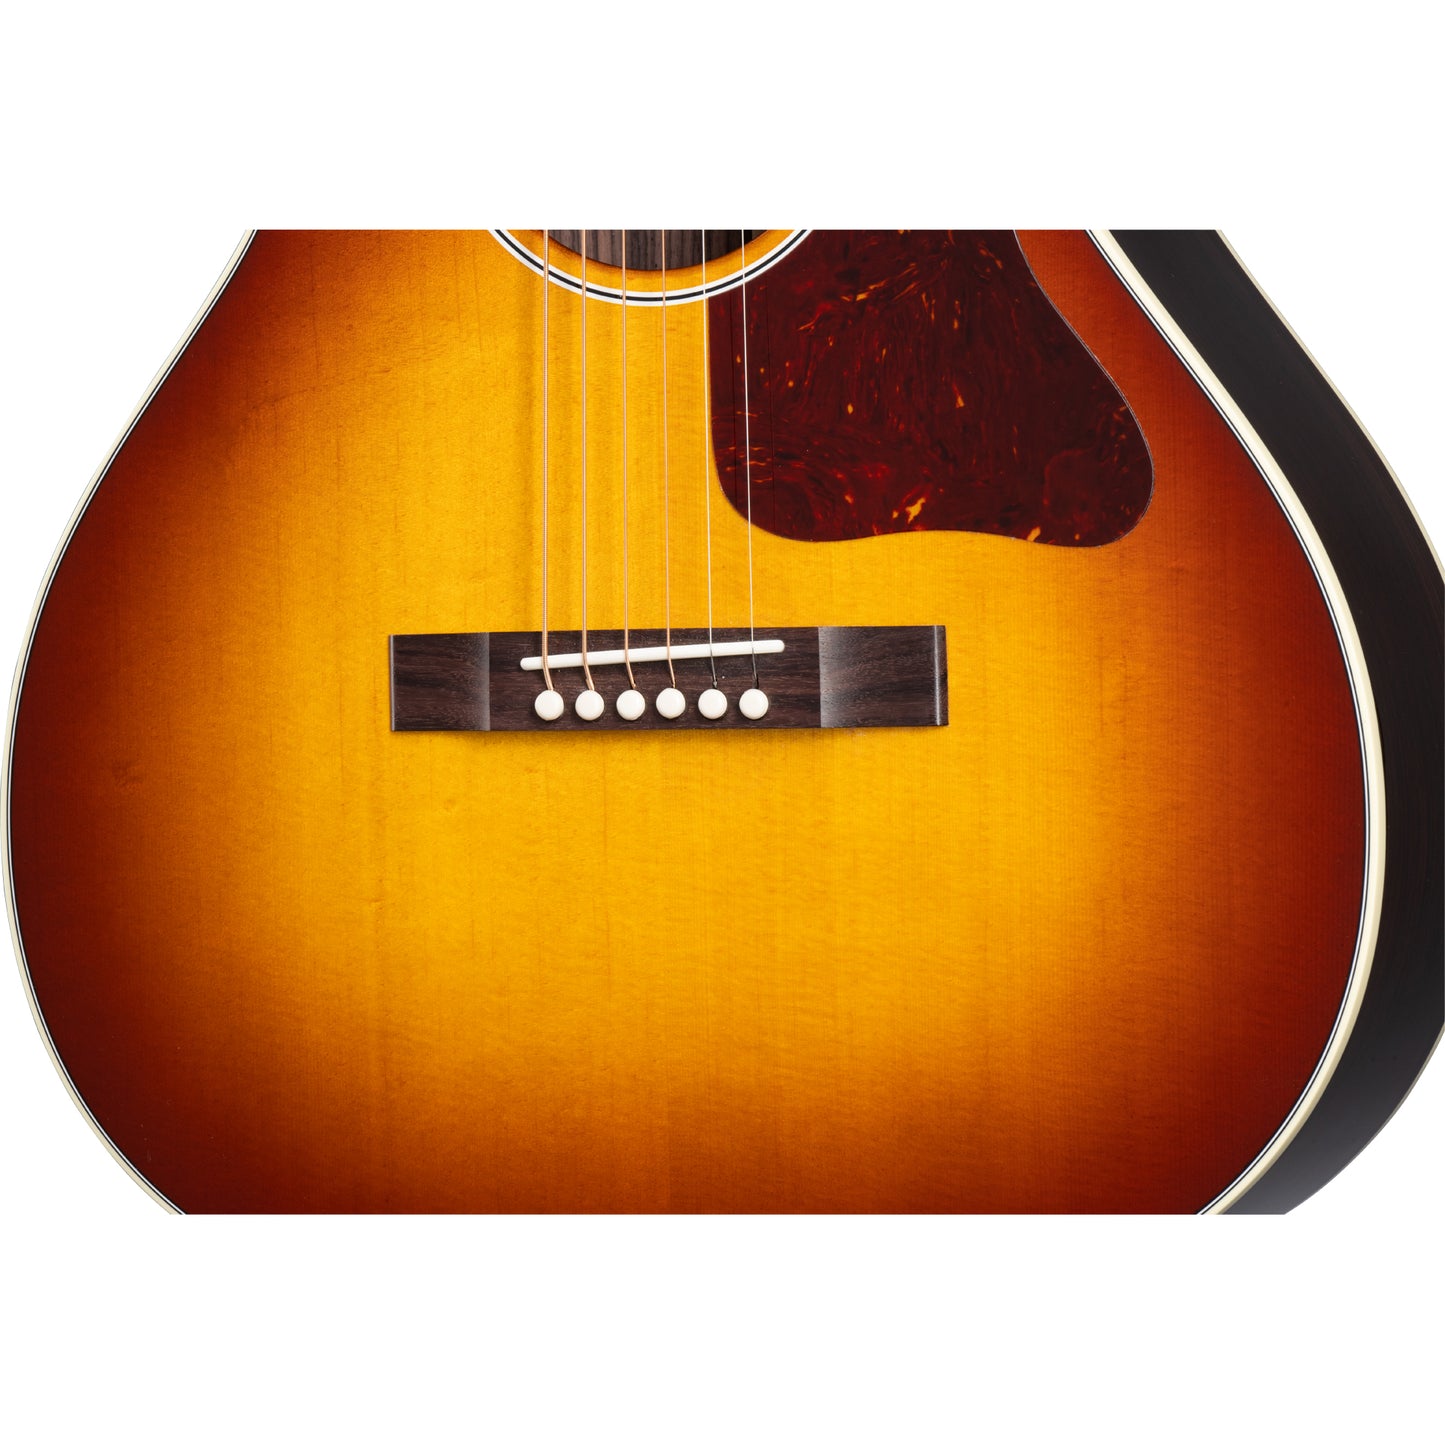 Gibson Modern L-00 Rosewood 12-Fret Acoustic Electric Guitar - Rosewood Burst